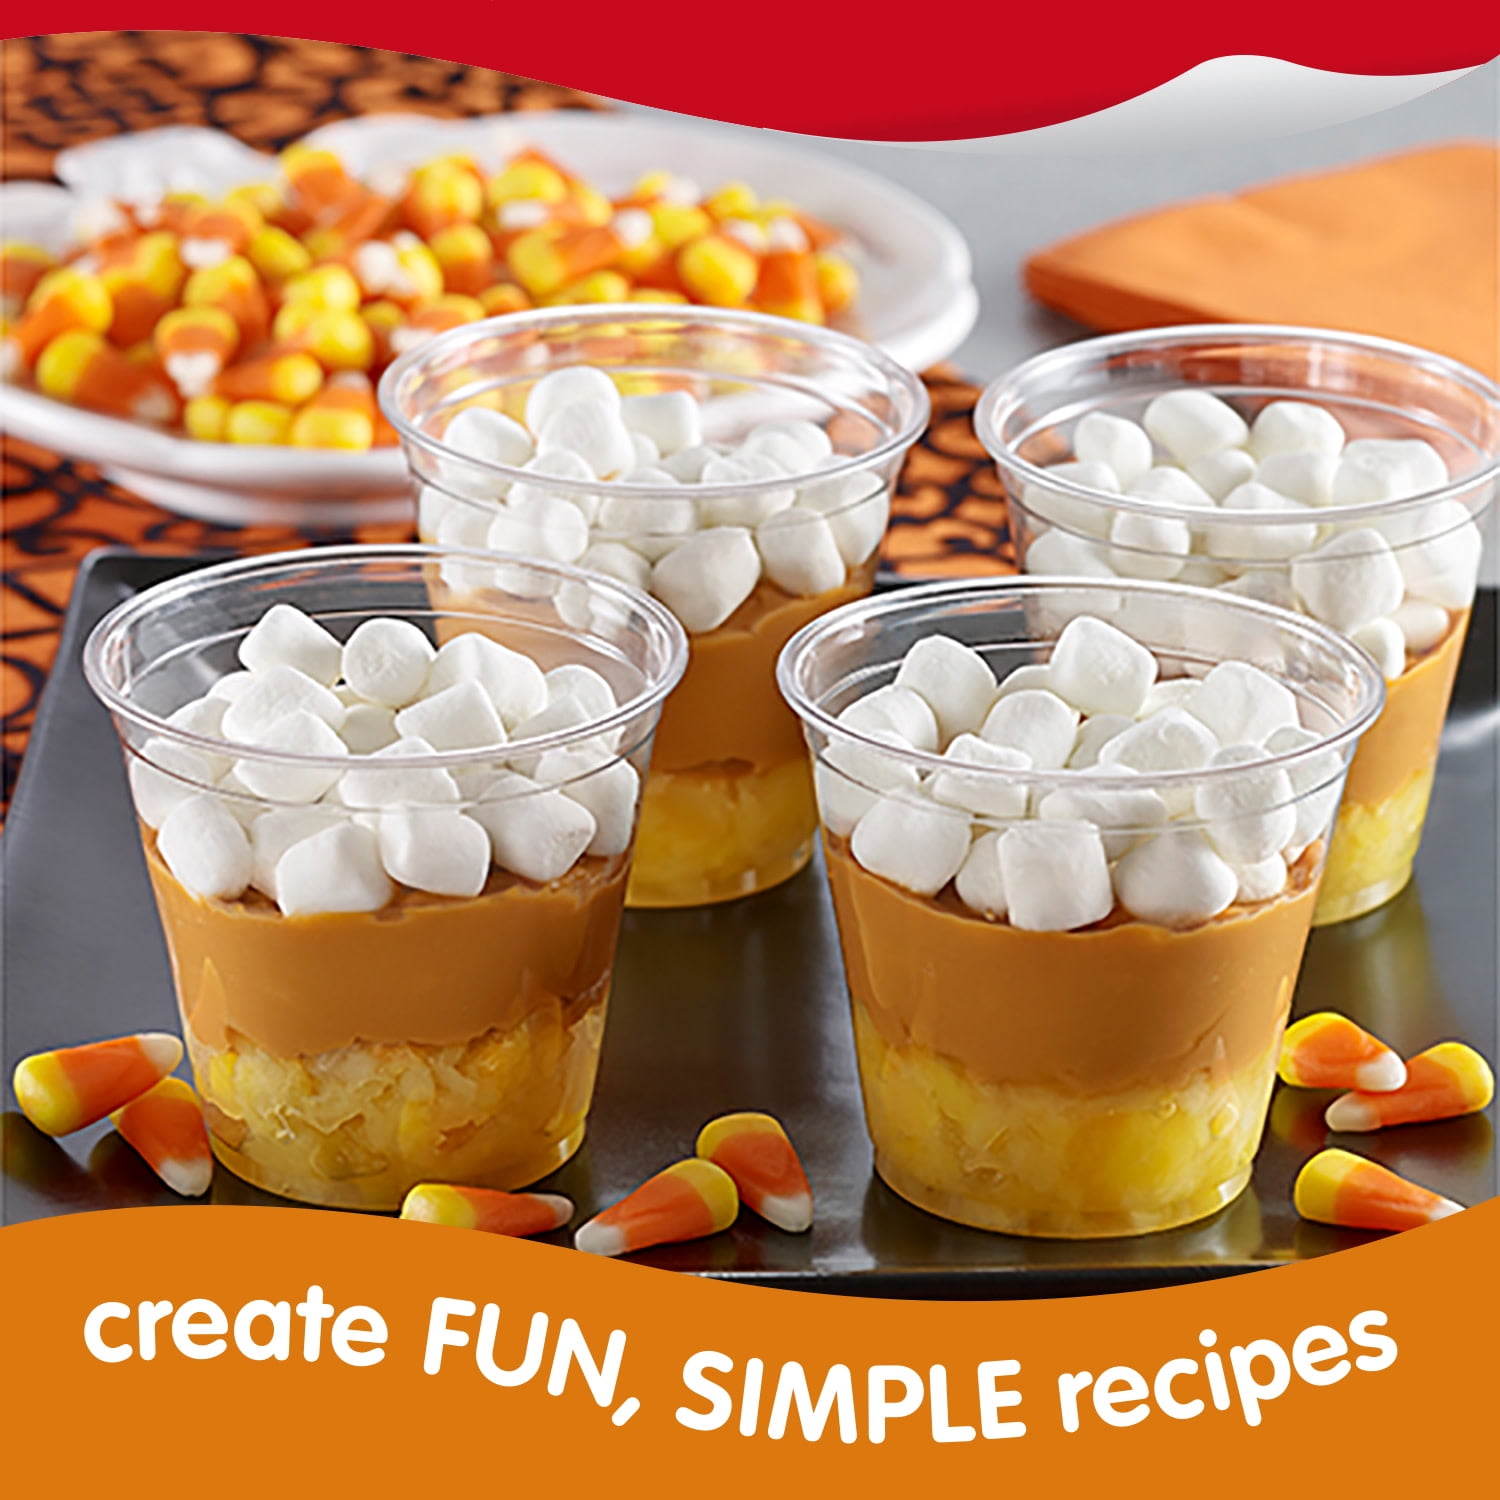 Snack Pack Super Size Butterscotch Pudding Cups, Made with Real